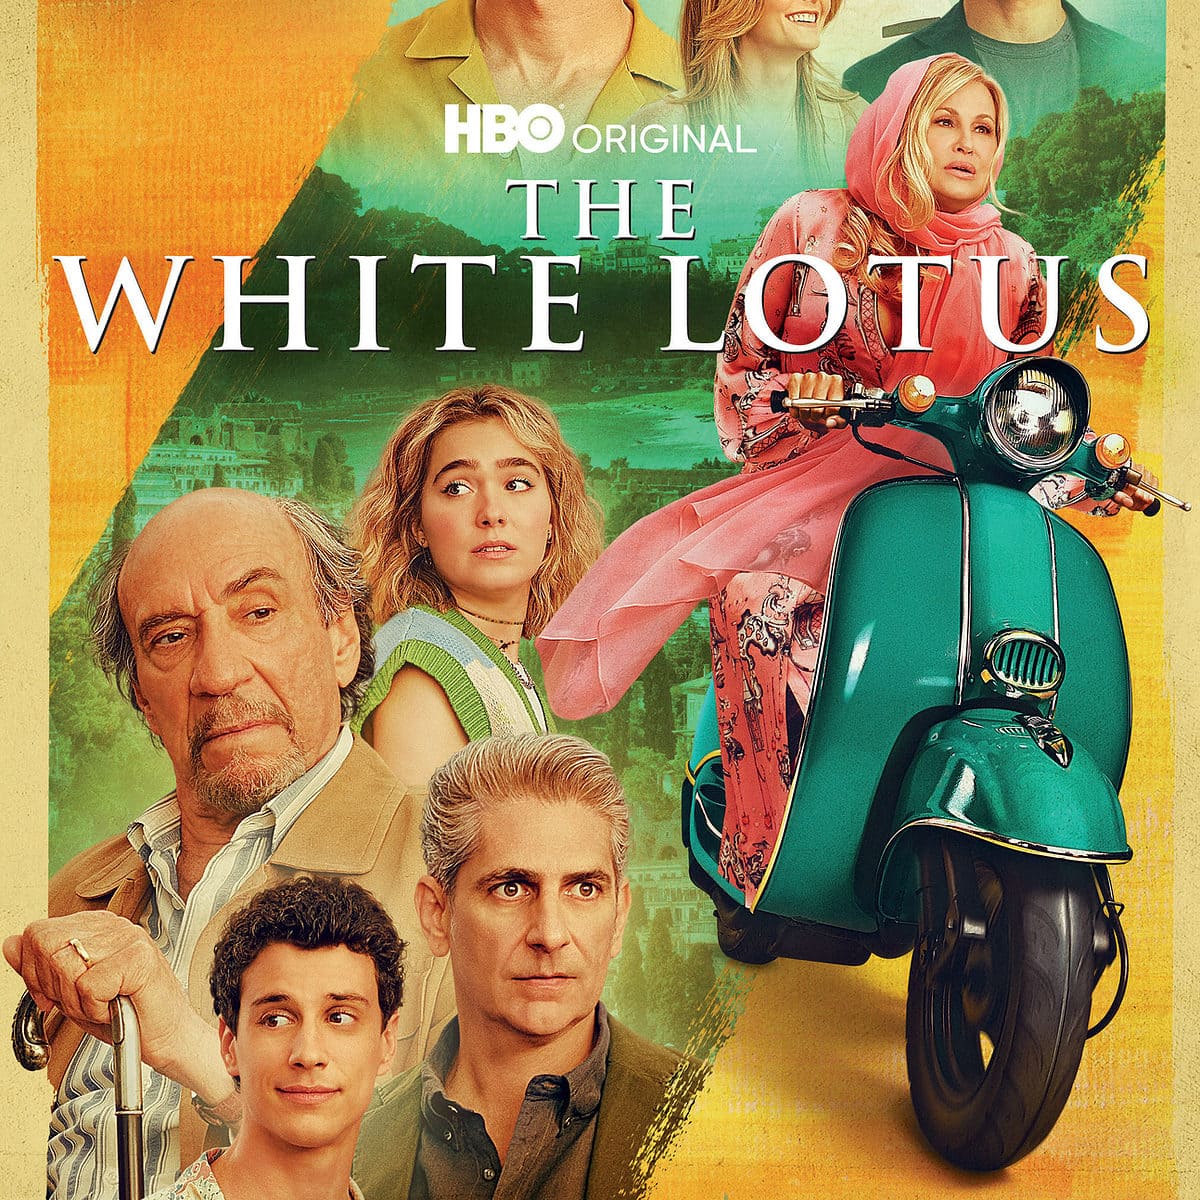 Poster for season 2 of 'The White Lotus' solely featuring the guests